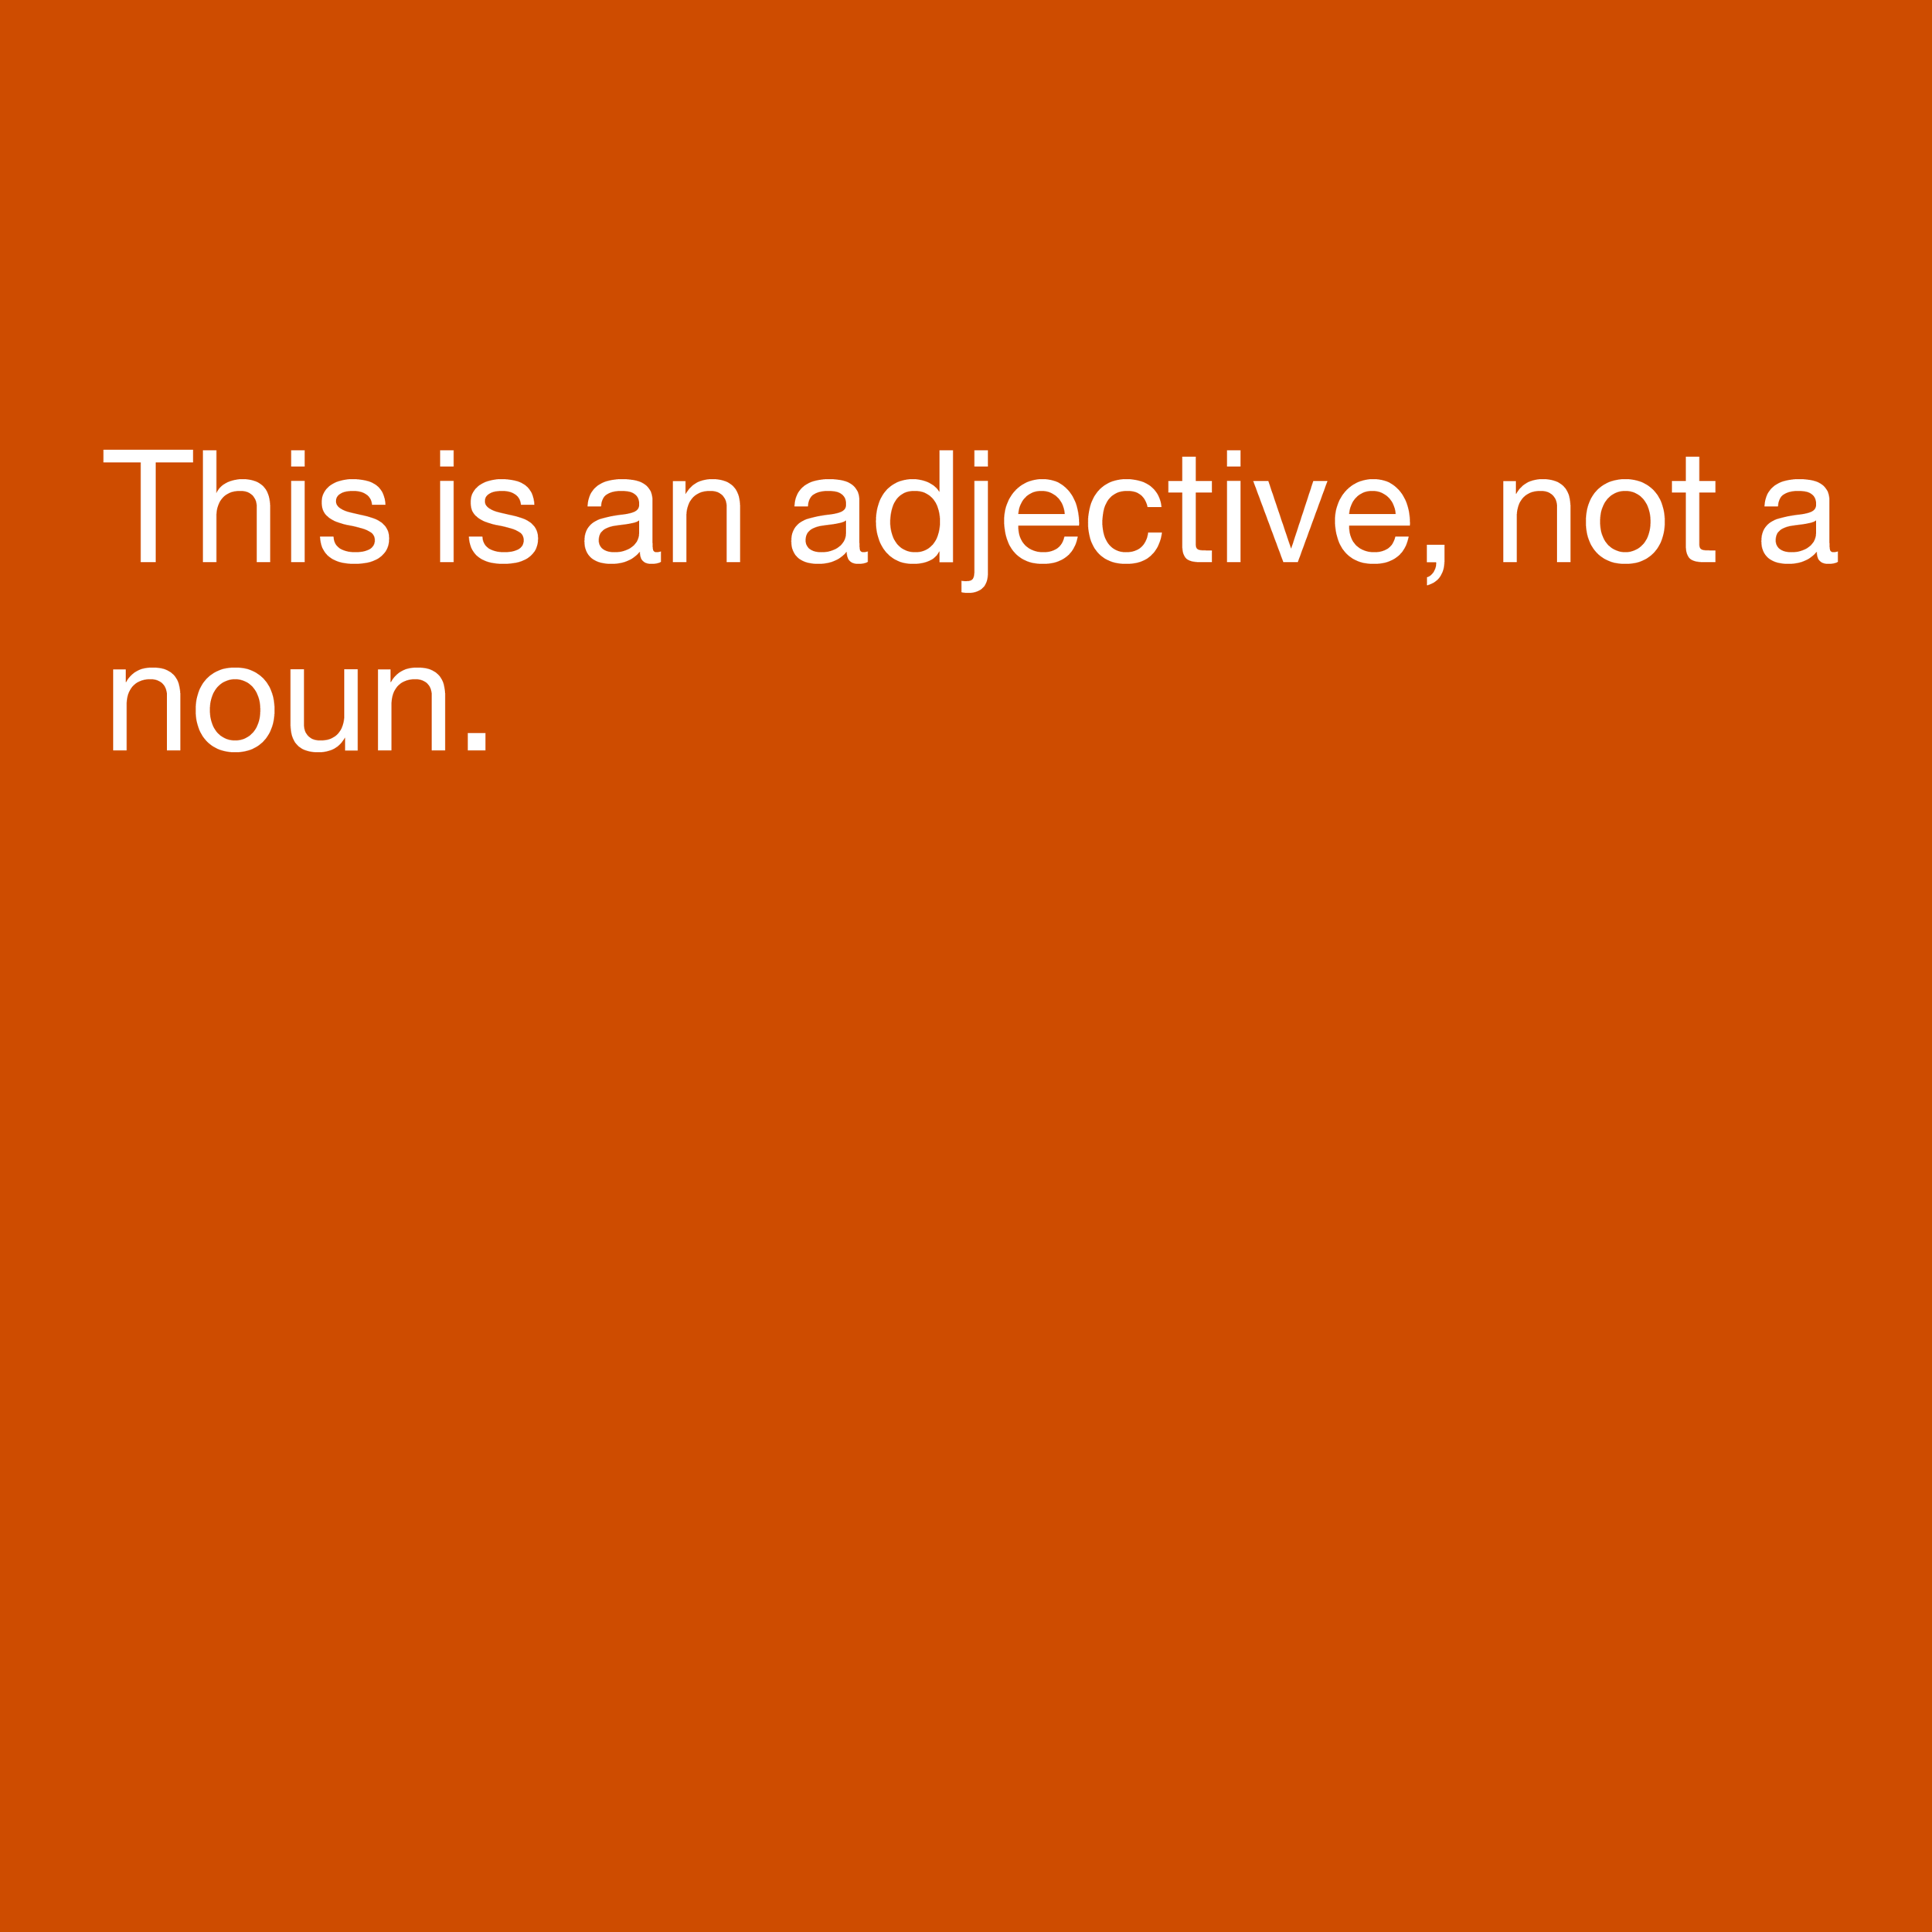  This is an adjective, not a noun. 